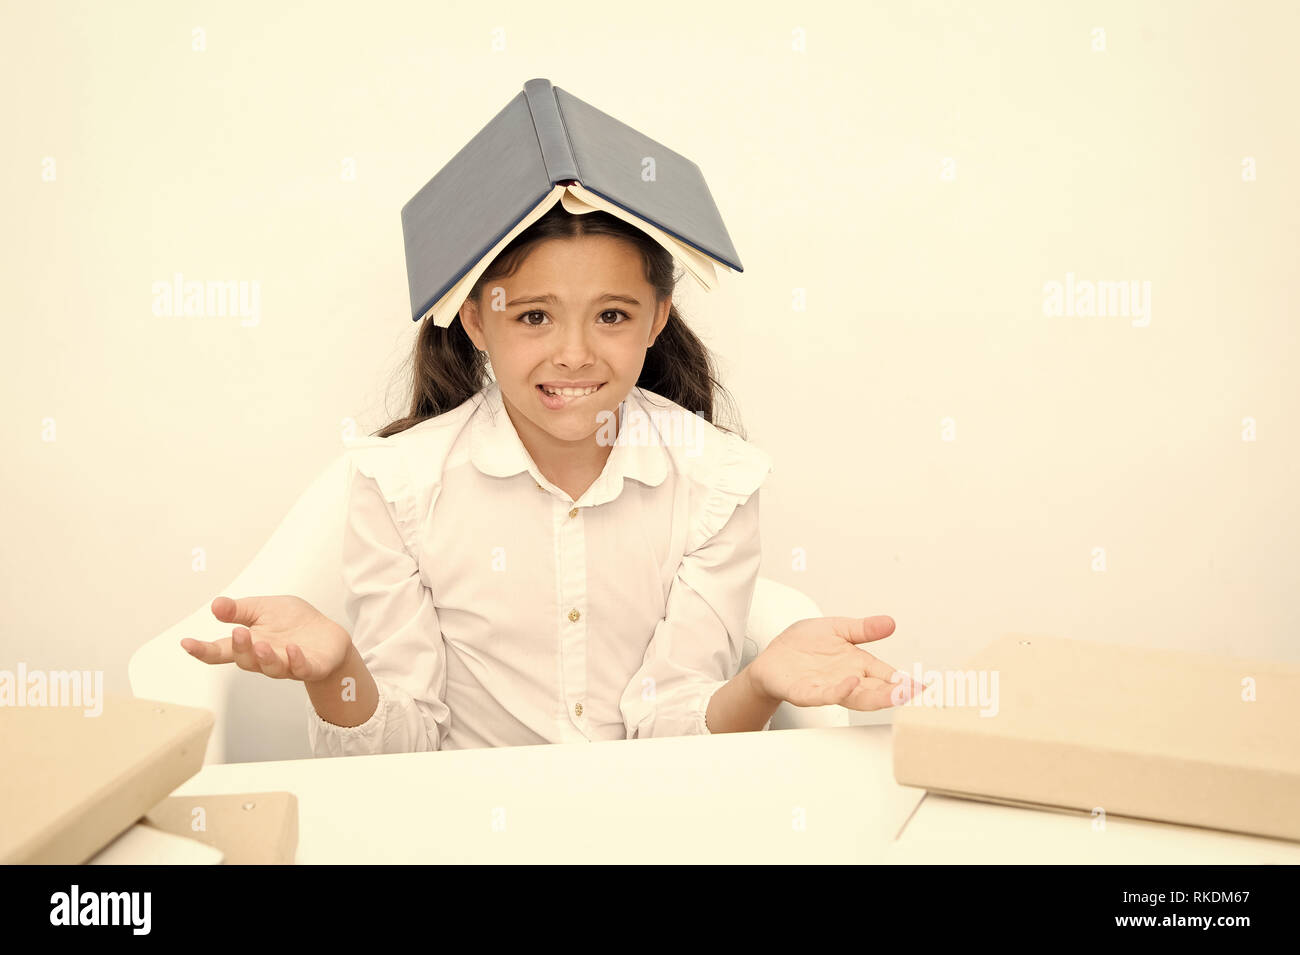 How is it possible to learn. Girl child confused exhausted with book roof on head white background. Schoolgirl tired of studying and reading. Kid school uniform tired face not want continue reading. Stock Photo